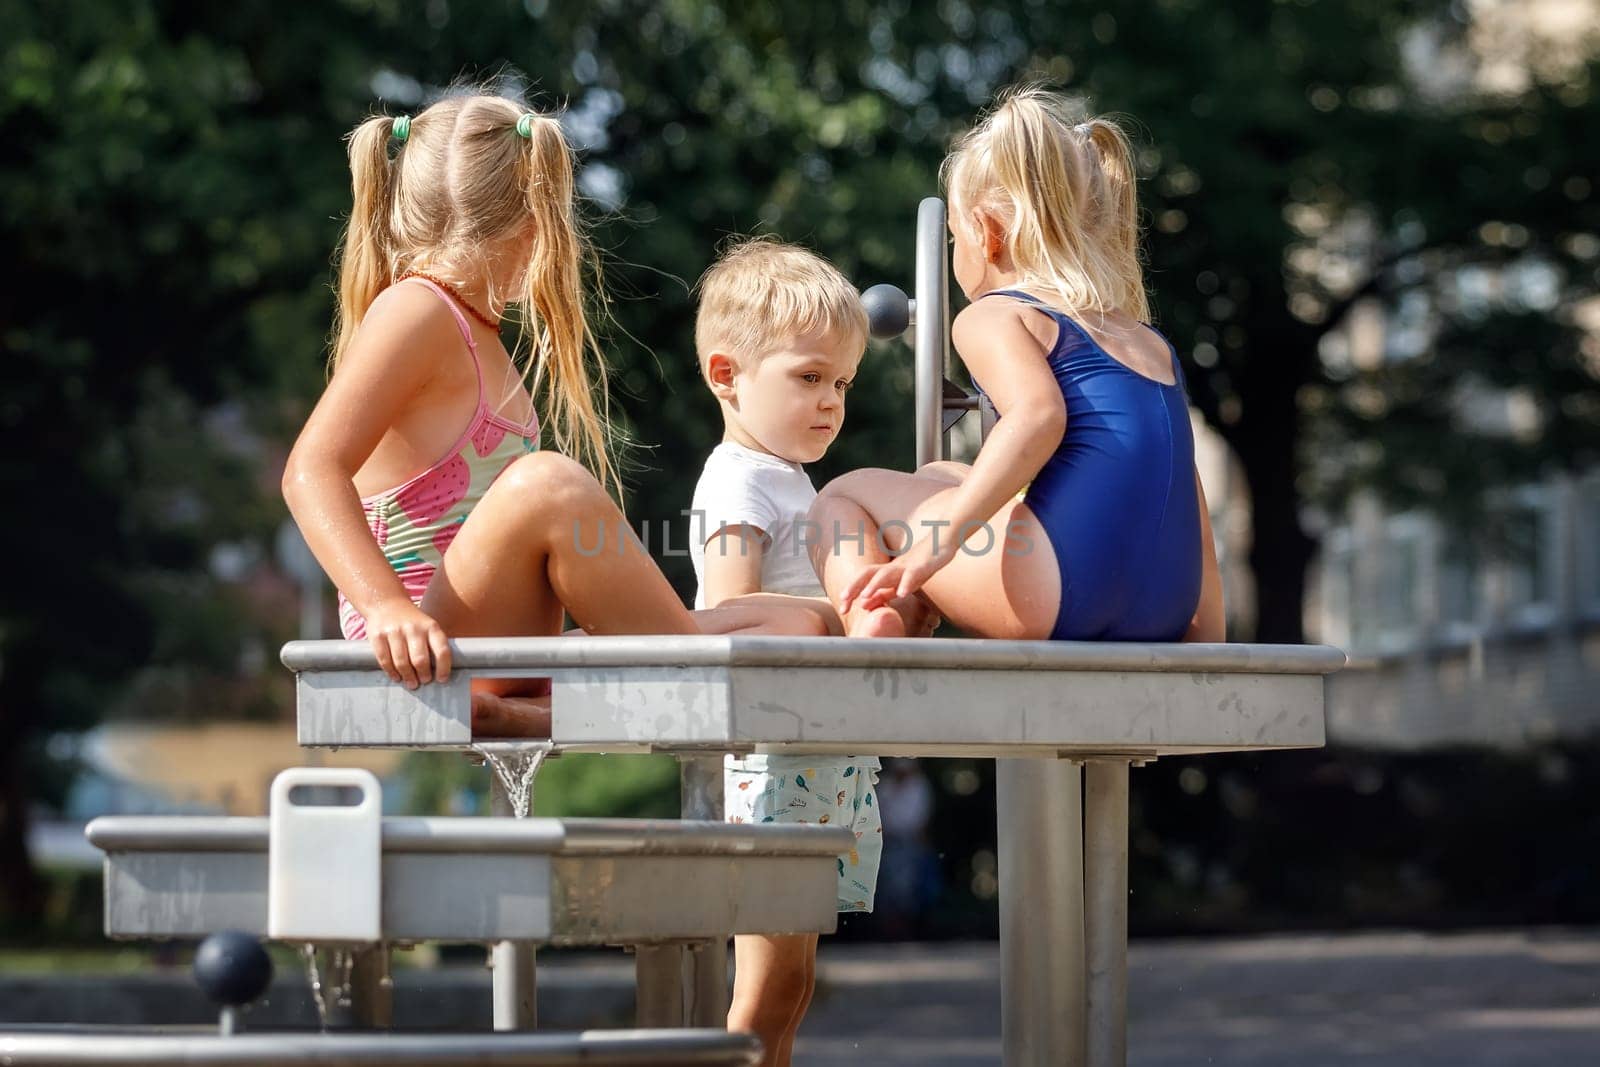 A happy boy and a cute girls in a blue bathing suit play with a water tap in a city park. by Lincikas